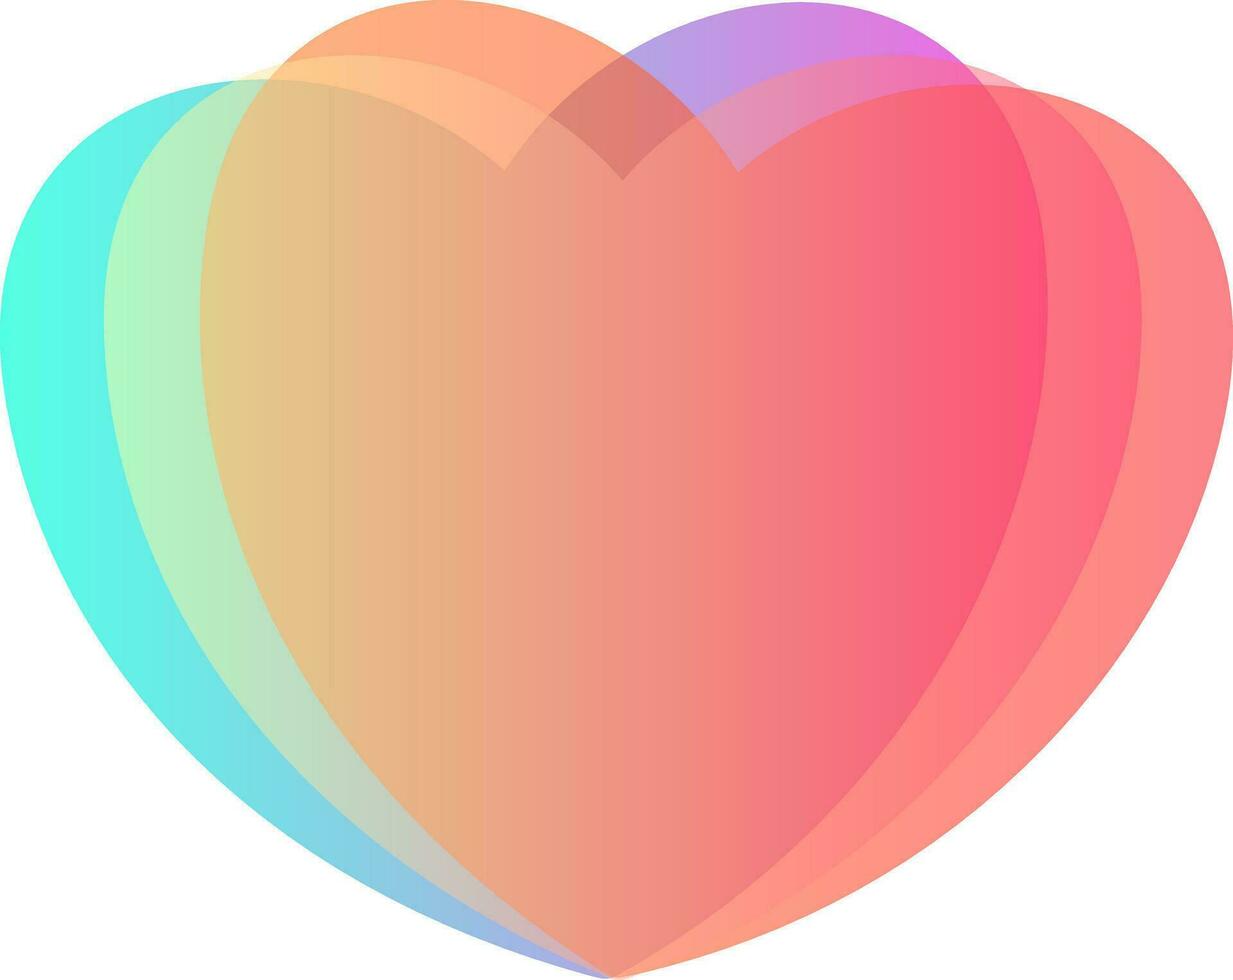 Colorful heart, love symbol or sign. vector